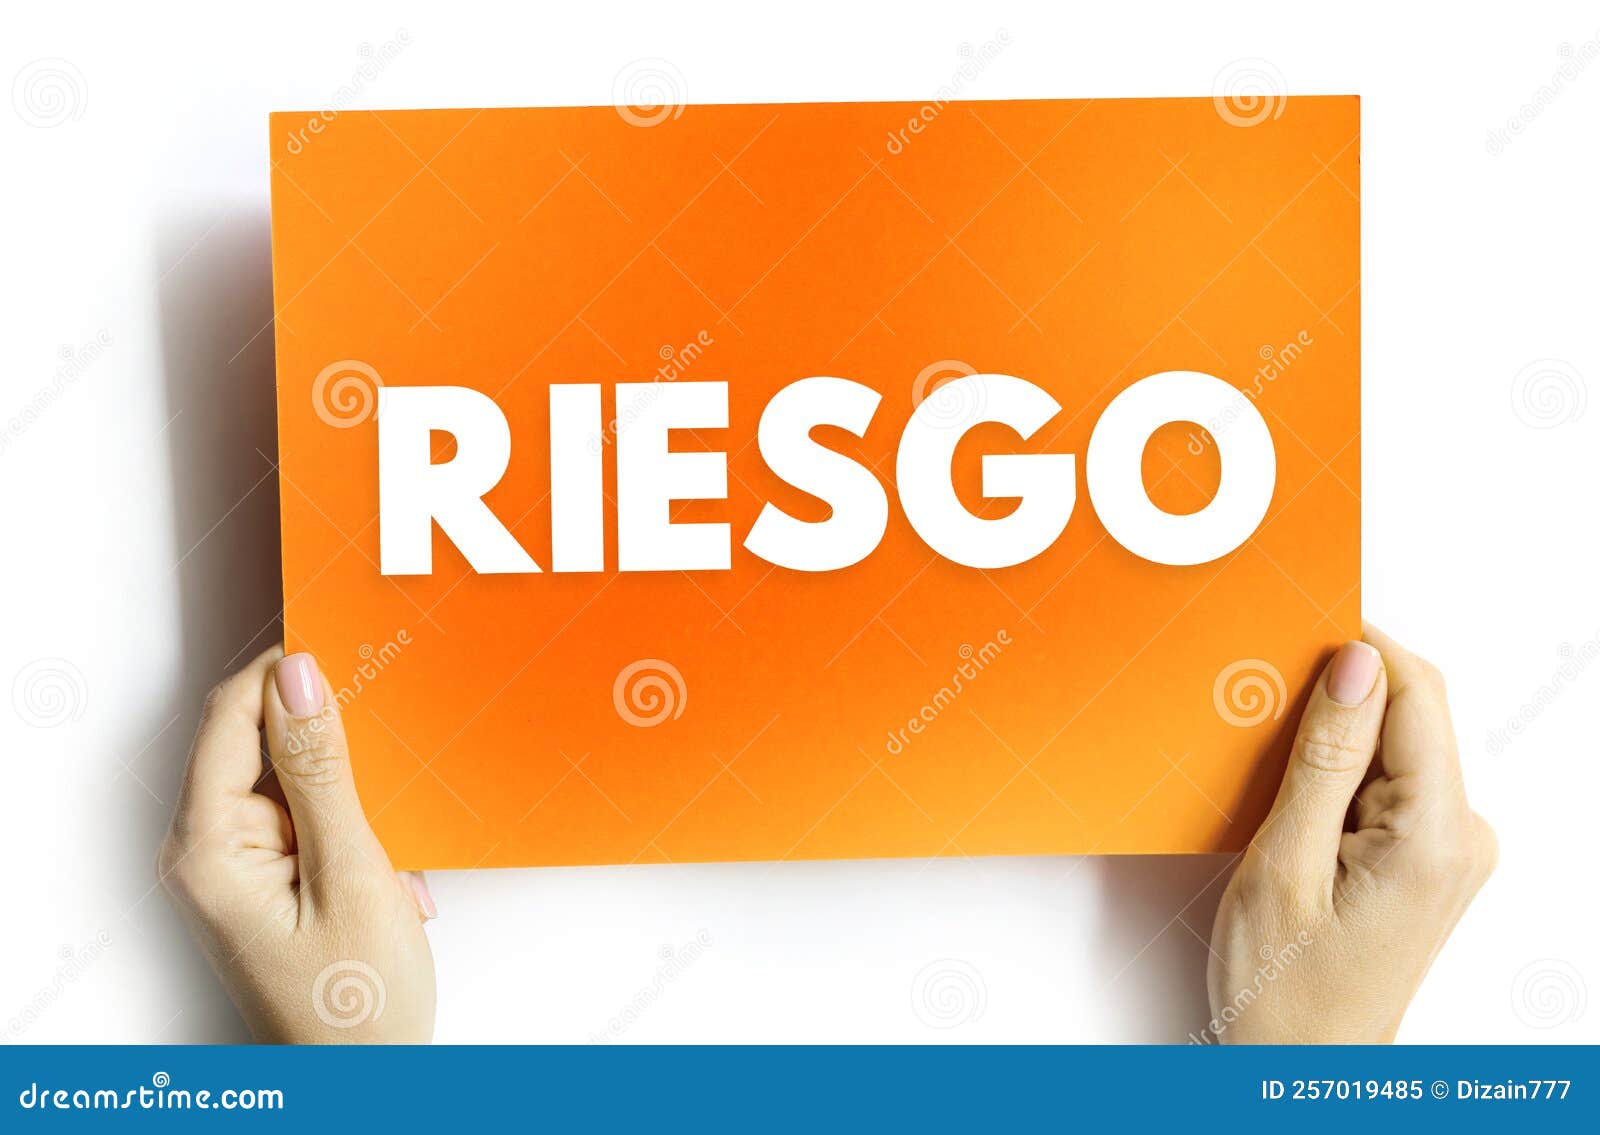 riesgo spanish words for risk text quote, concept background